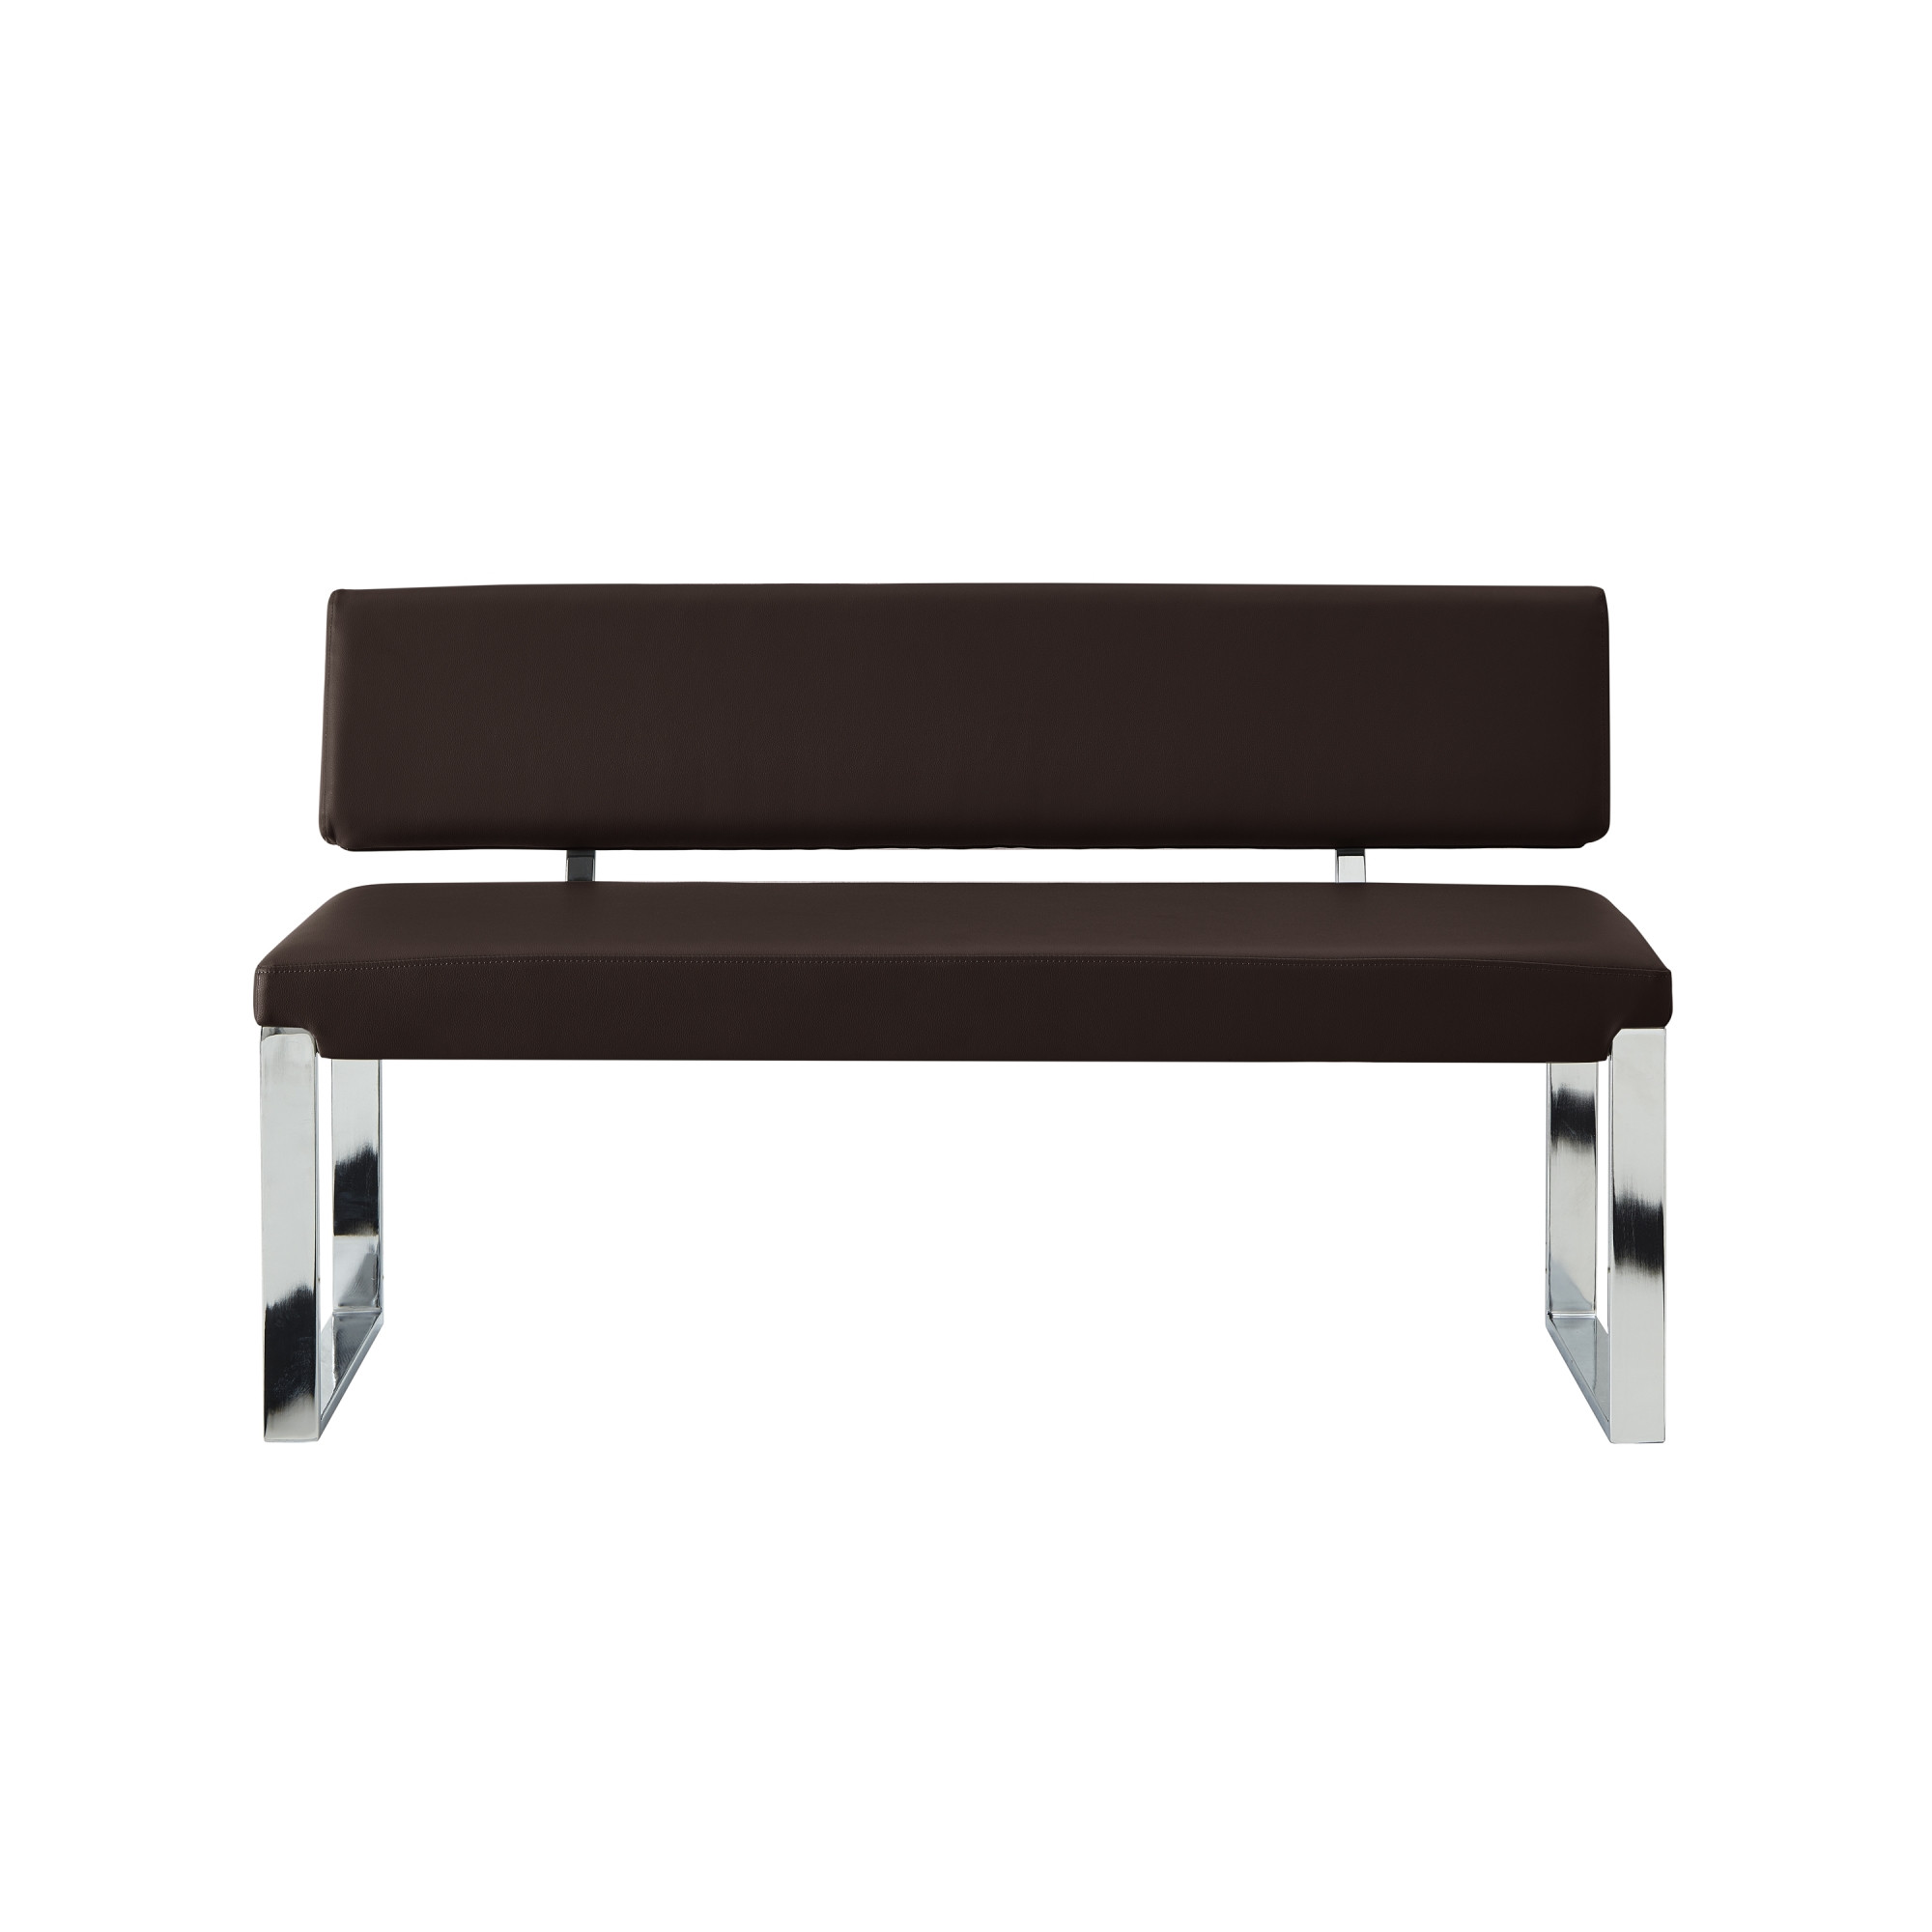 50" Brown and Silver Upholstered Faux Leather Bench-490919-1